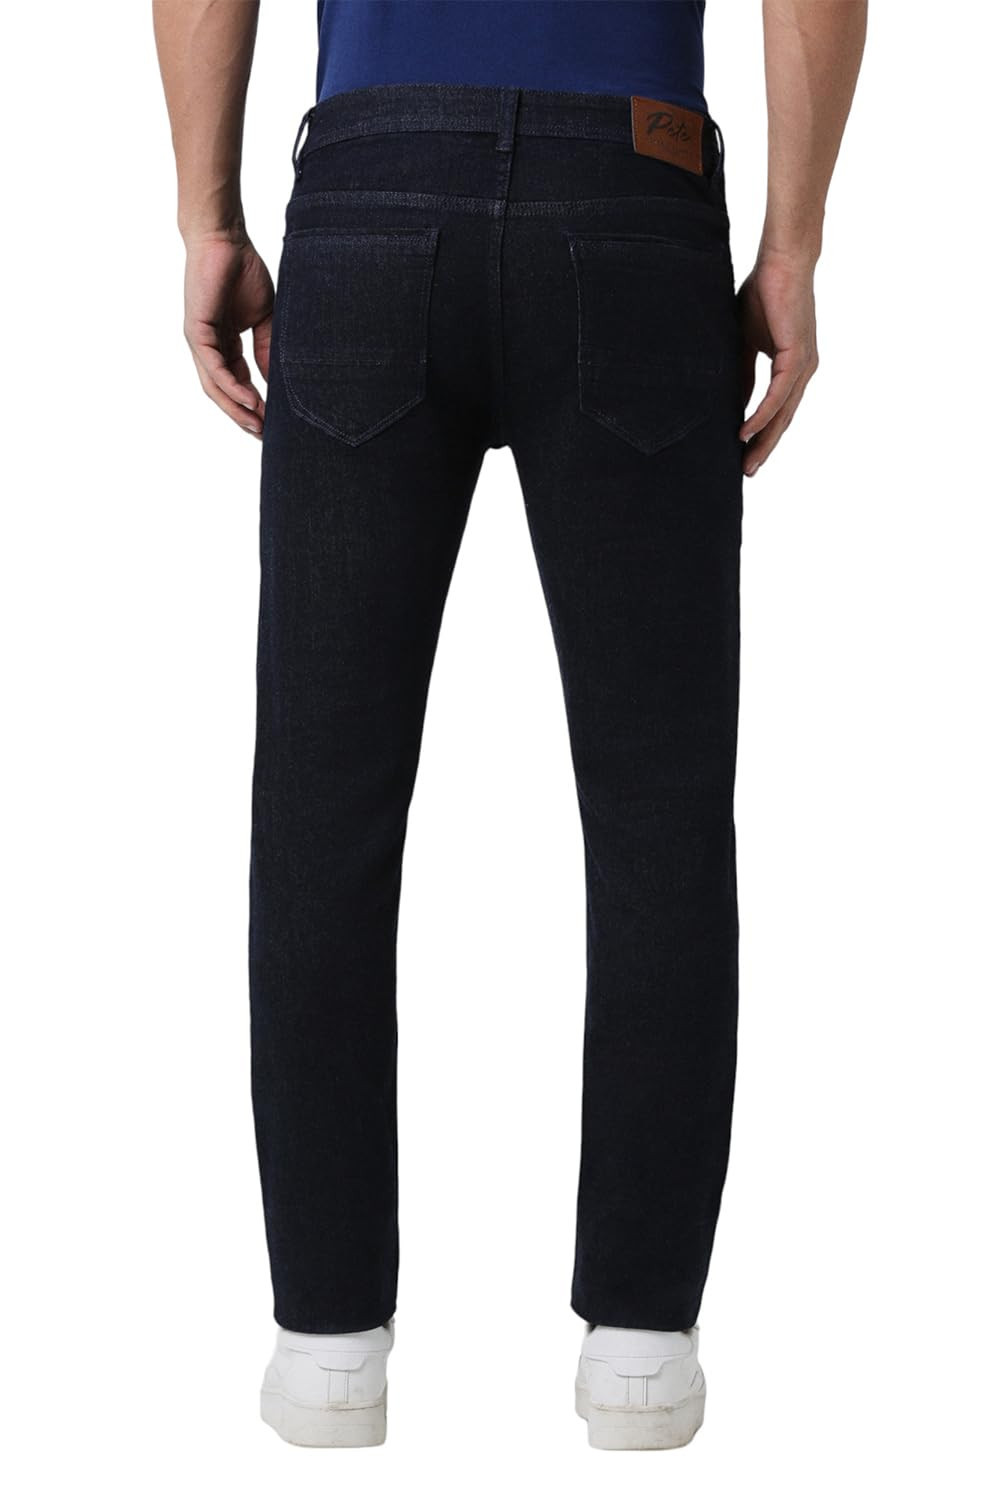 Buy Peter England Jeans Online in India | Myntra